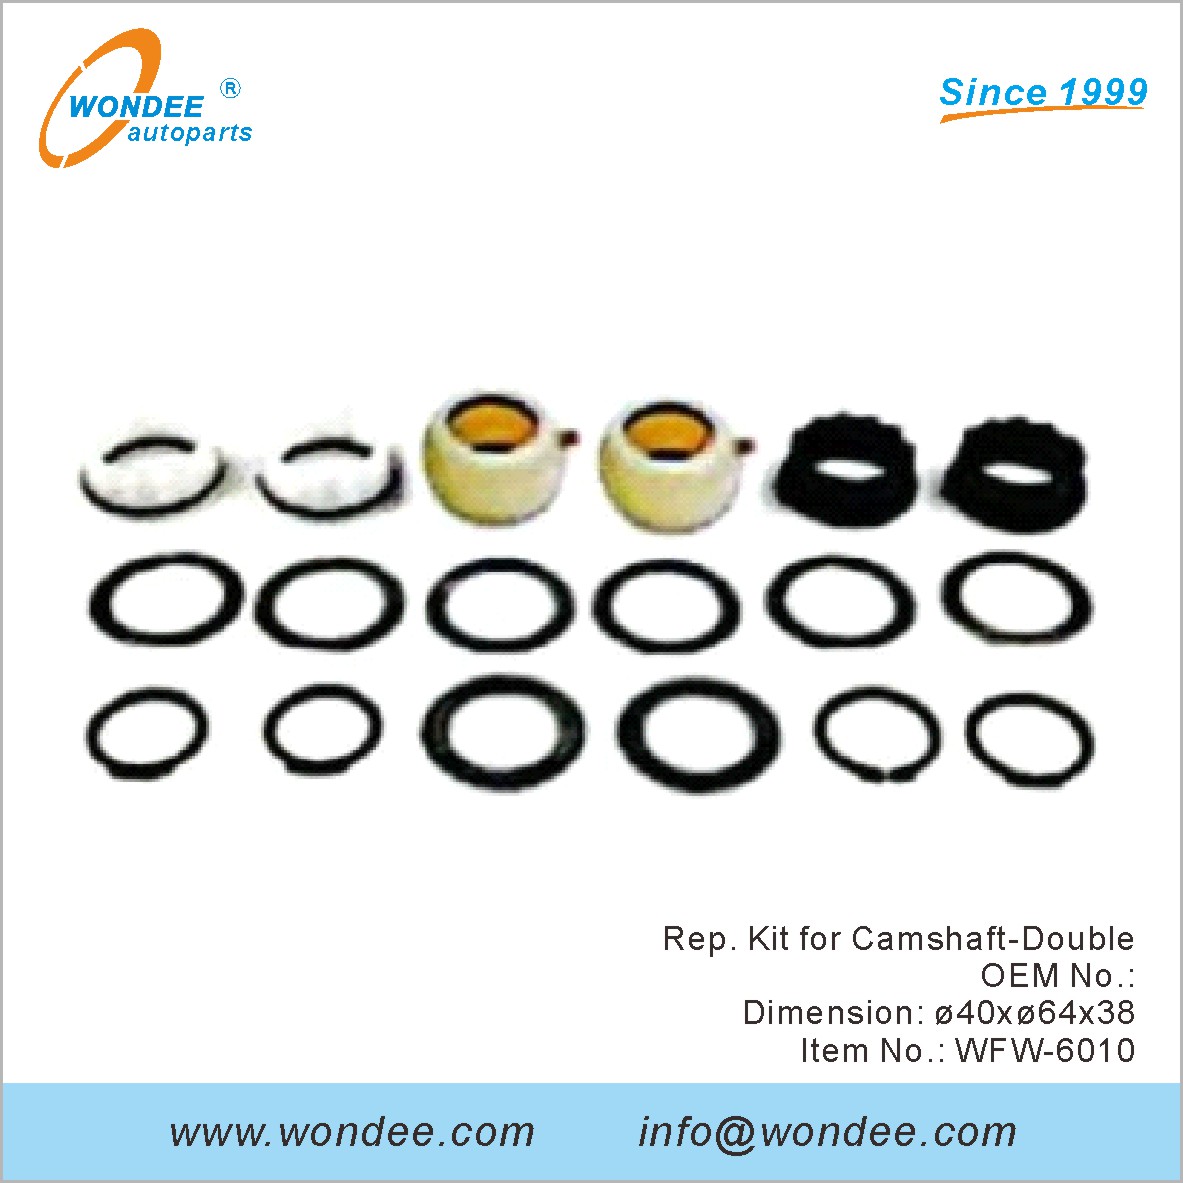 Rep. Kit for Camshaft-Double OEM for FUWA from WONDEE